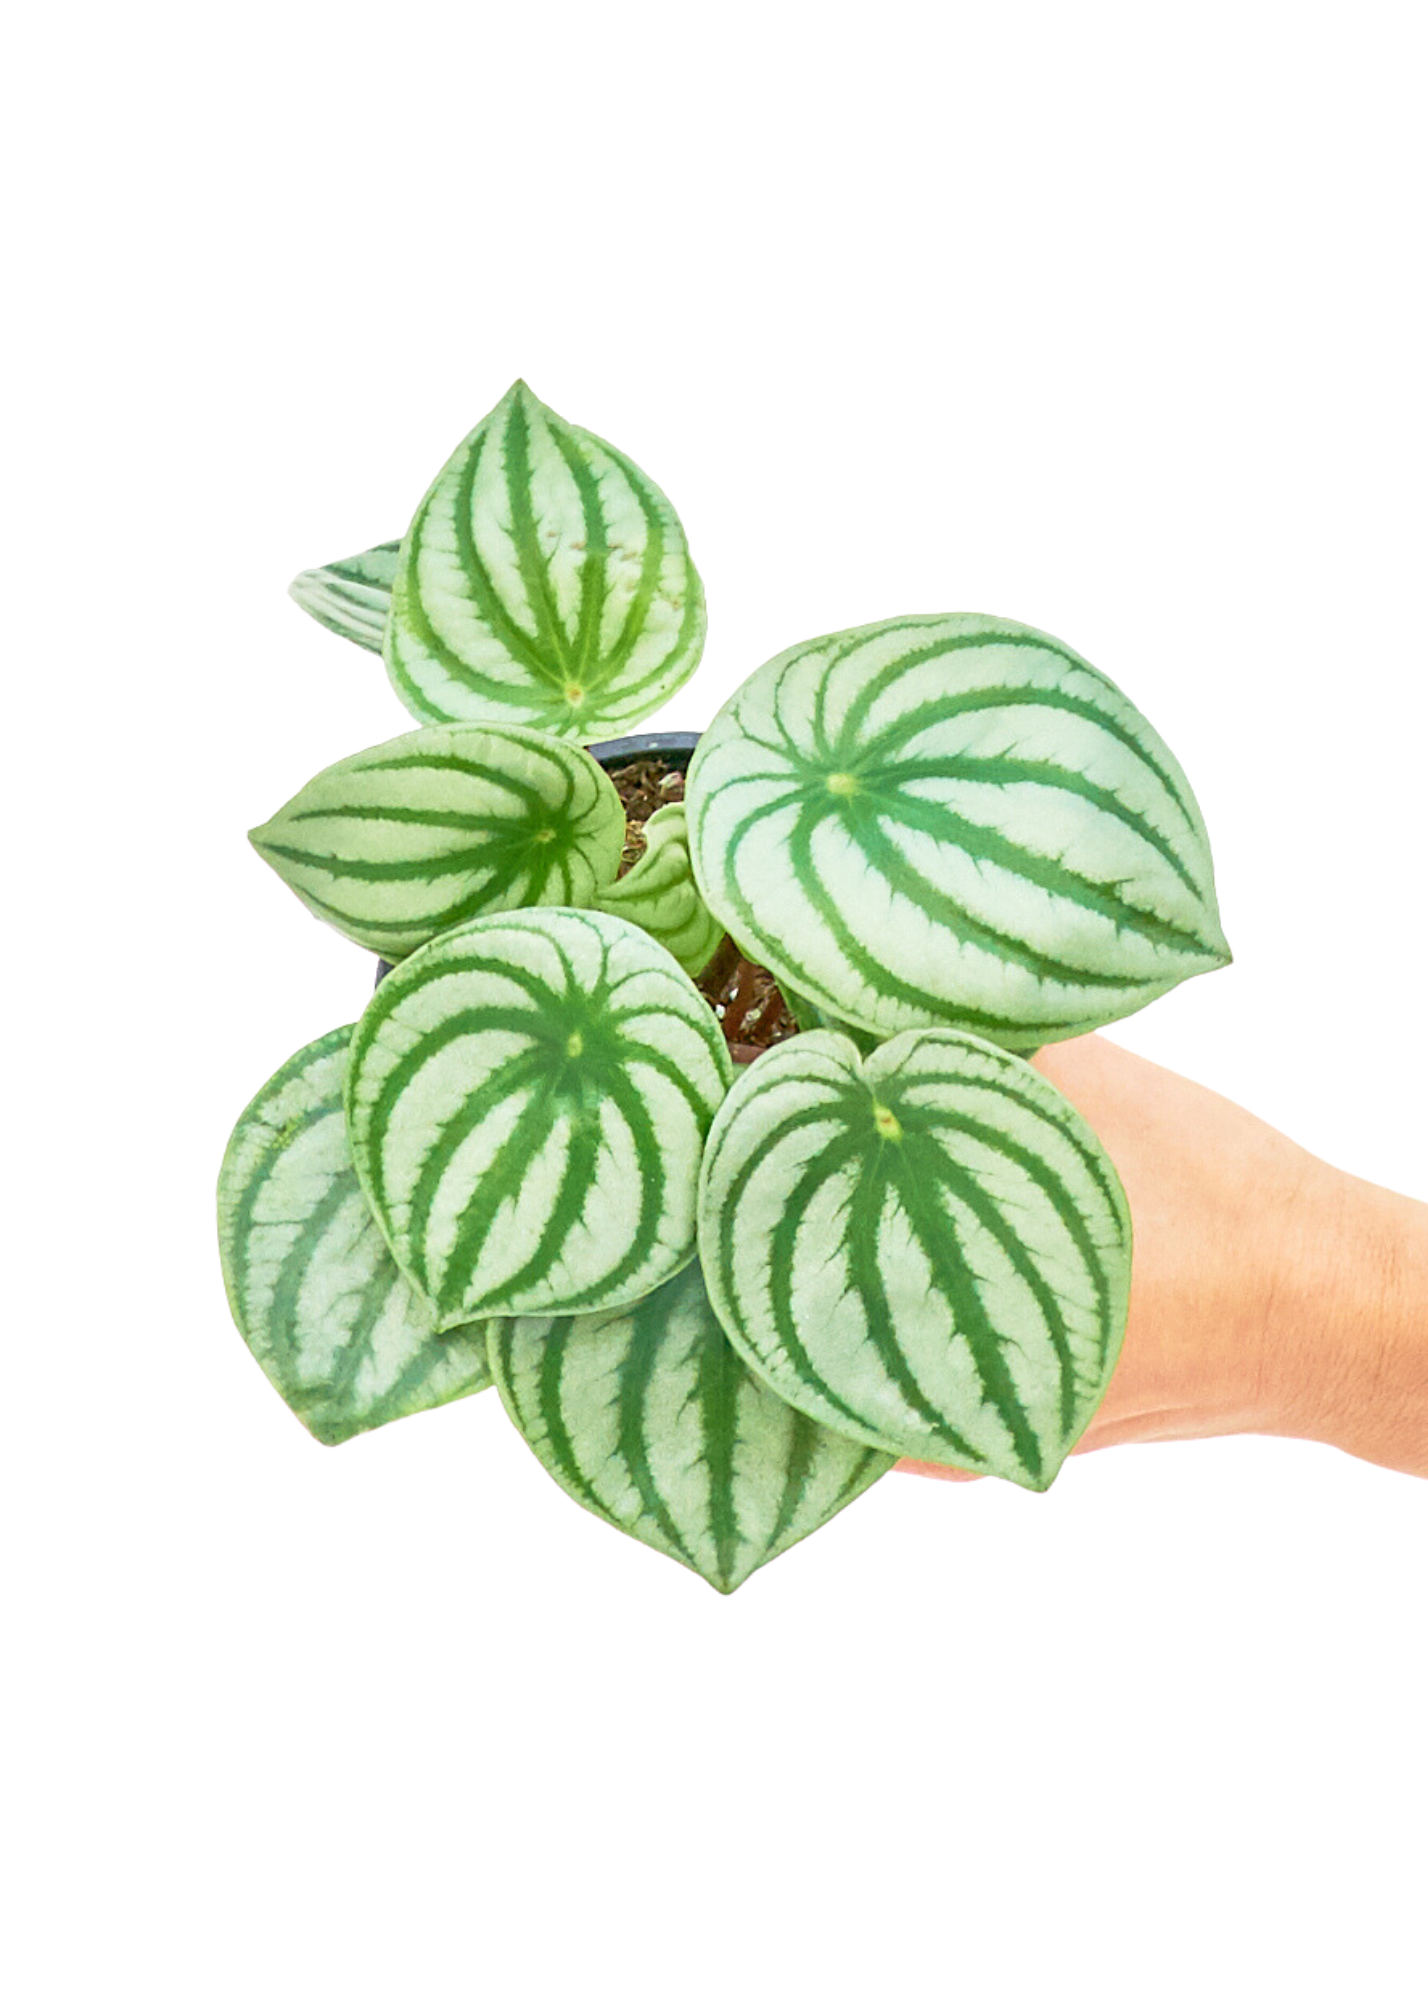 Small size Watermelon Peperomia Plant in a growers pot with a white background with a hand holding the pot to show the top view